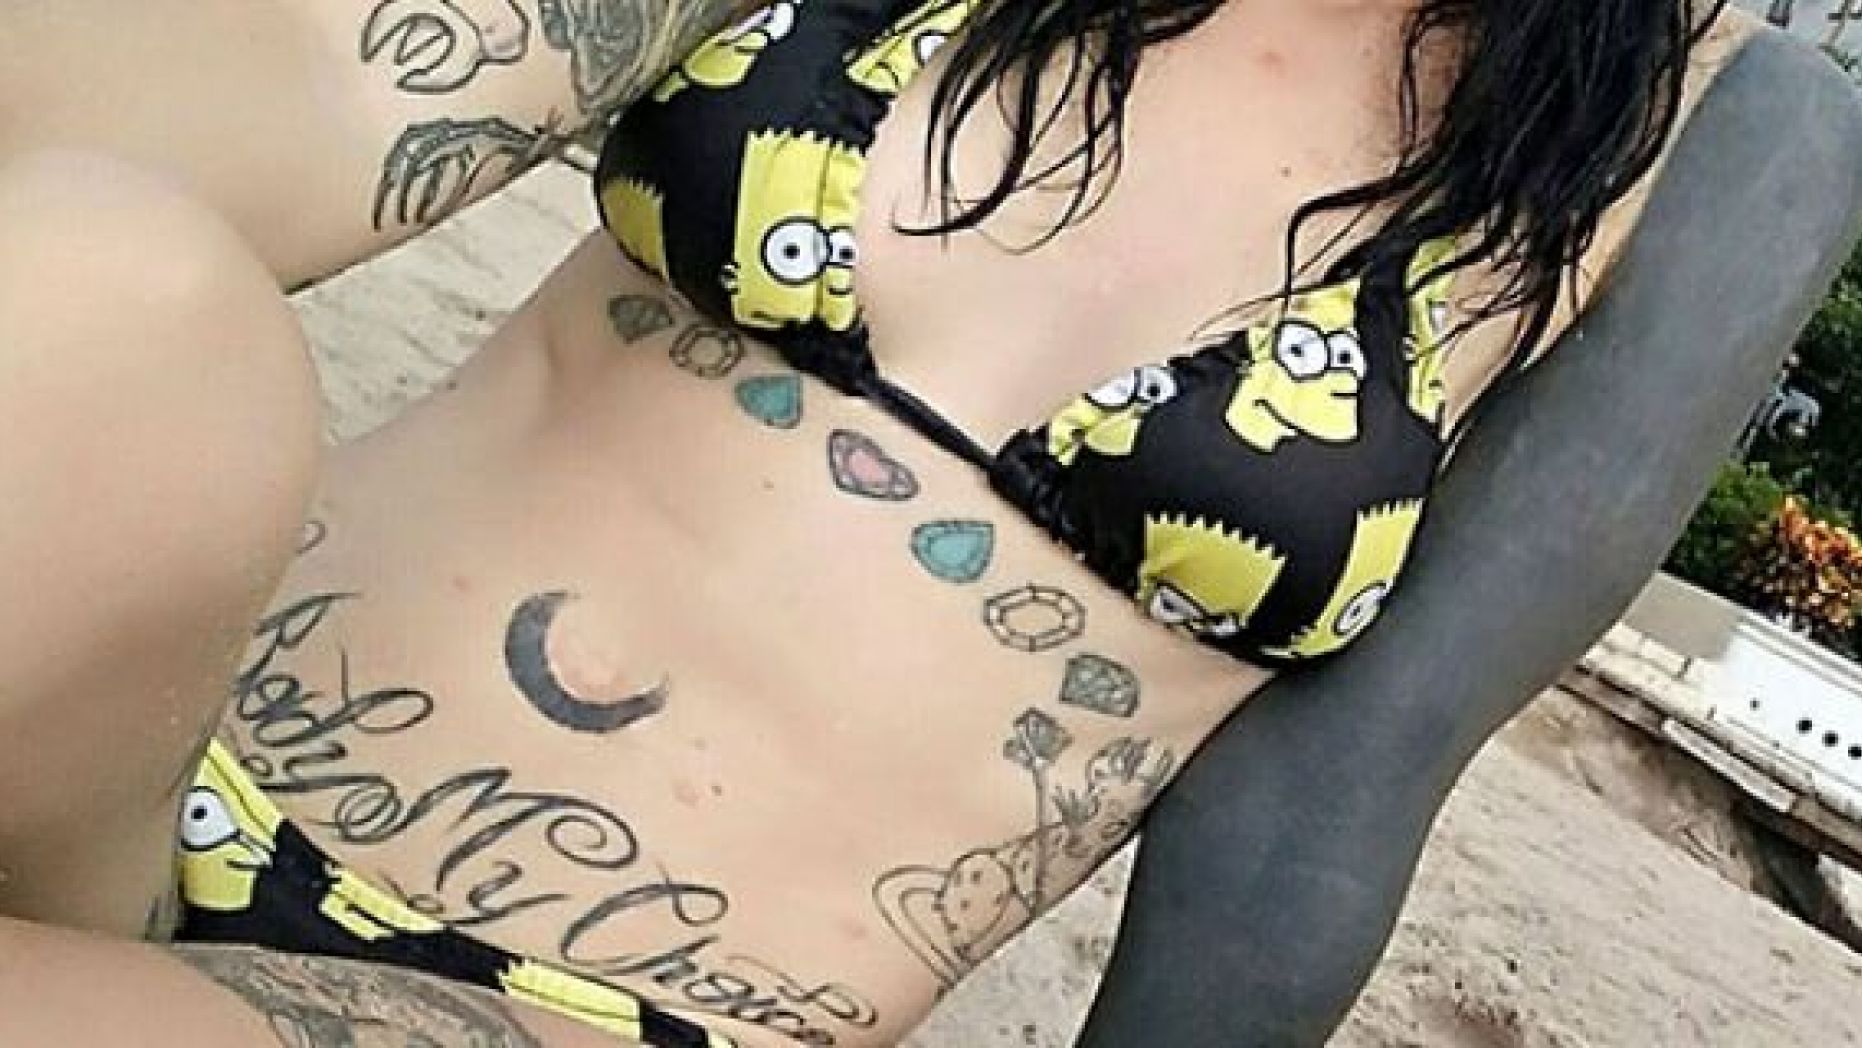 Paulina Casillas Landeros said she had her belly button removed because her family did not approve of her lifestyle.<br data-cke-eol="1">“></picture></div>
<div class=